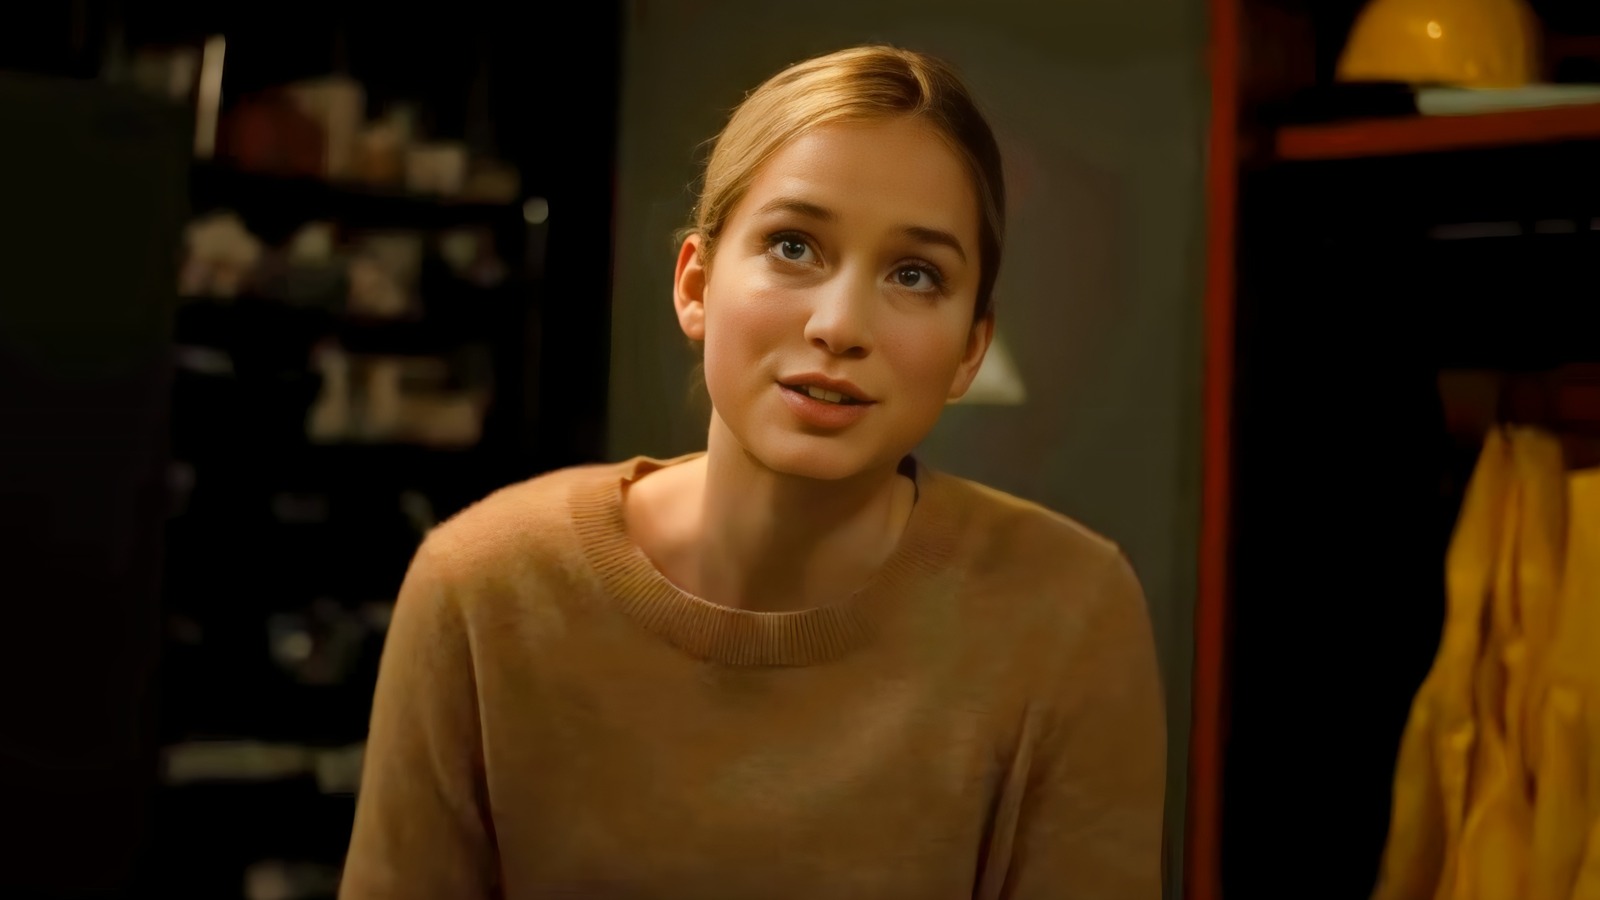 Five Nights At Freddy's: Why We Expect Elizabeth Lail's Vanessa To Be A  Franchise Movie Twist